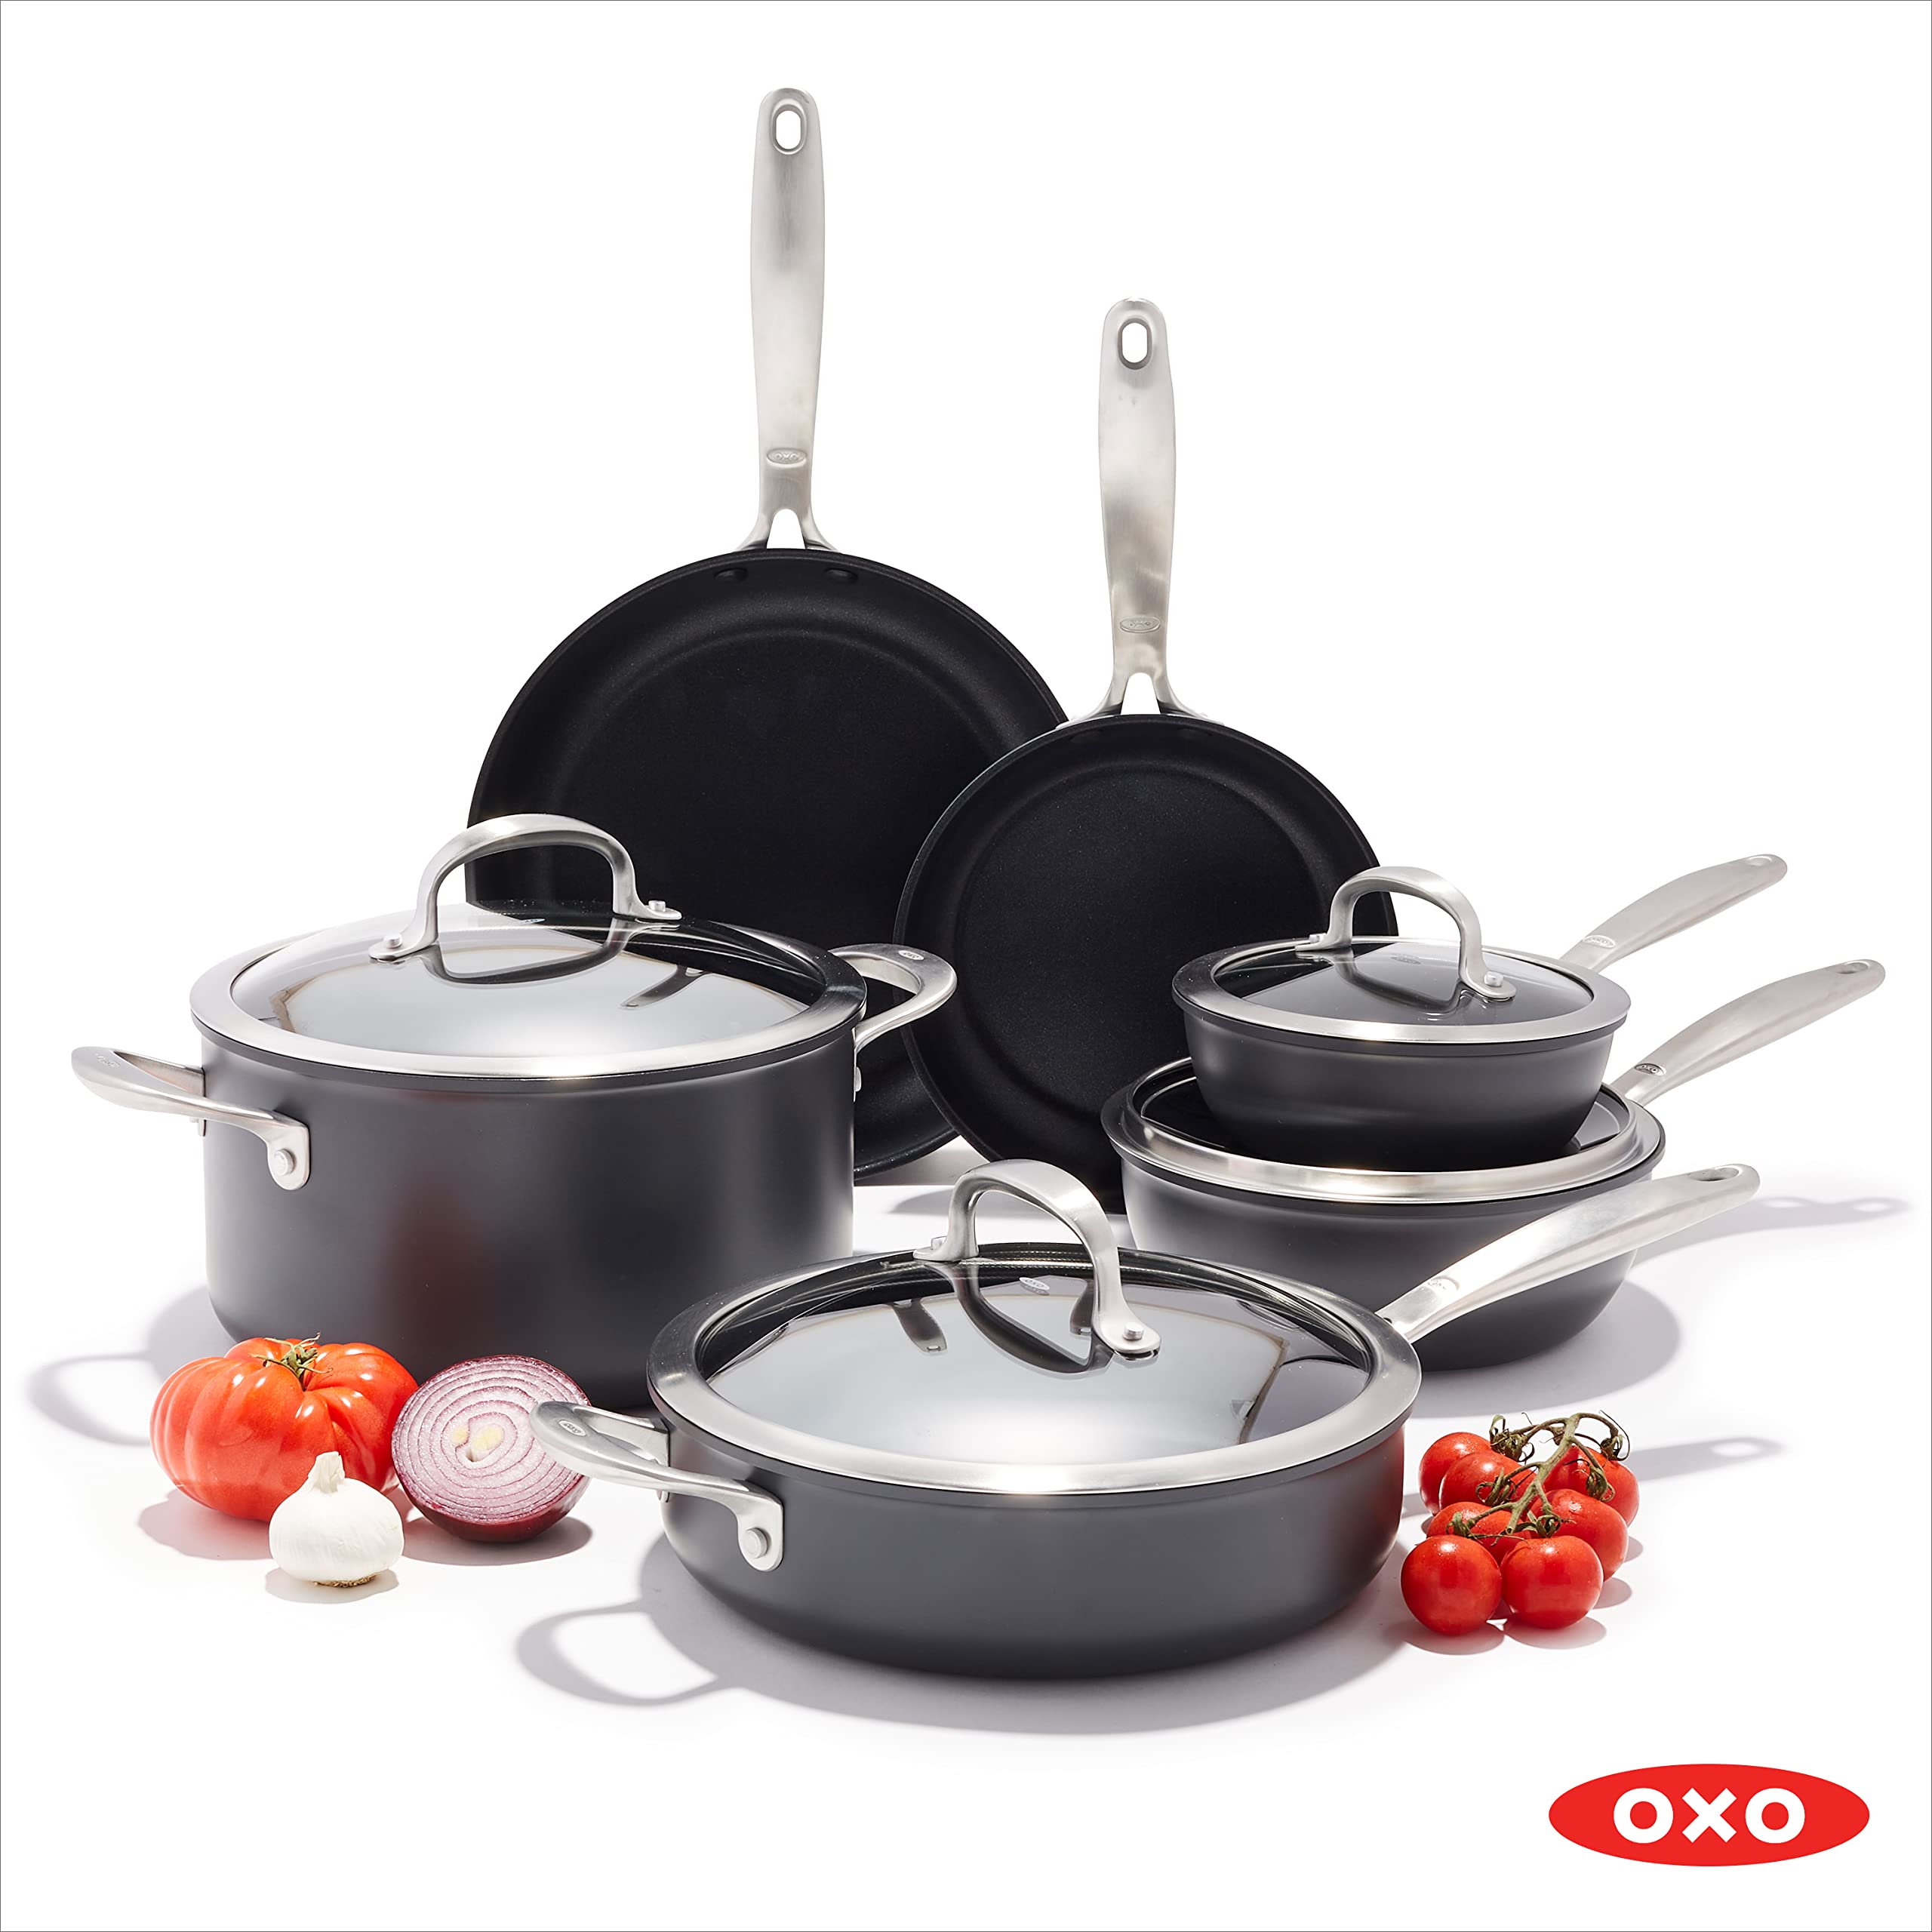 OXO Good Grips Pro 10 Piece Cookware Pots and Pans Set, 3-Layered German Engineered Nonstick Coating, Stainless Steel Handle, Dishwasher Safe, Oven Safe, Black